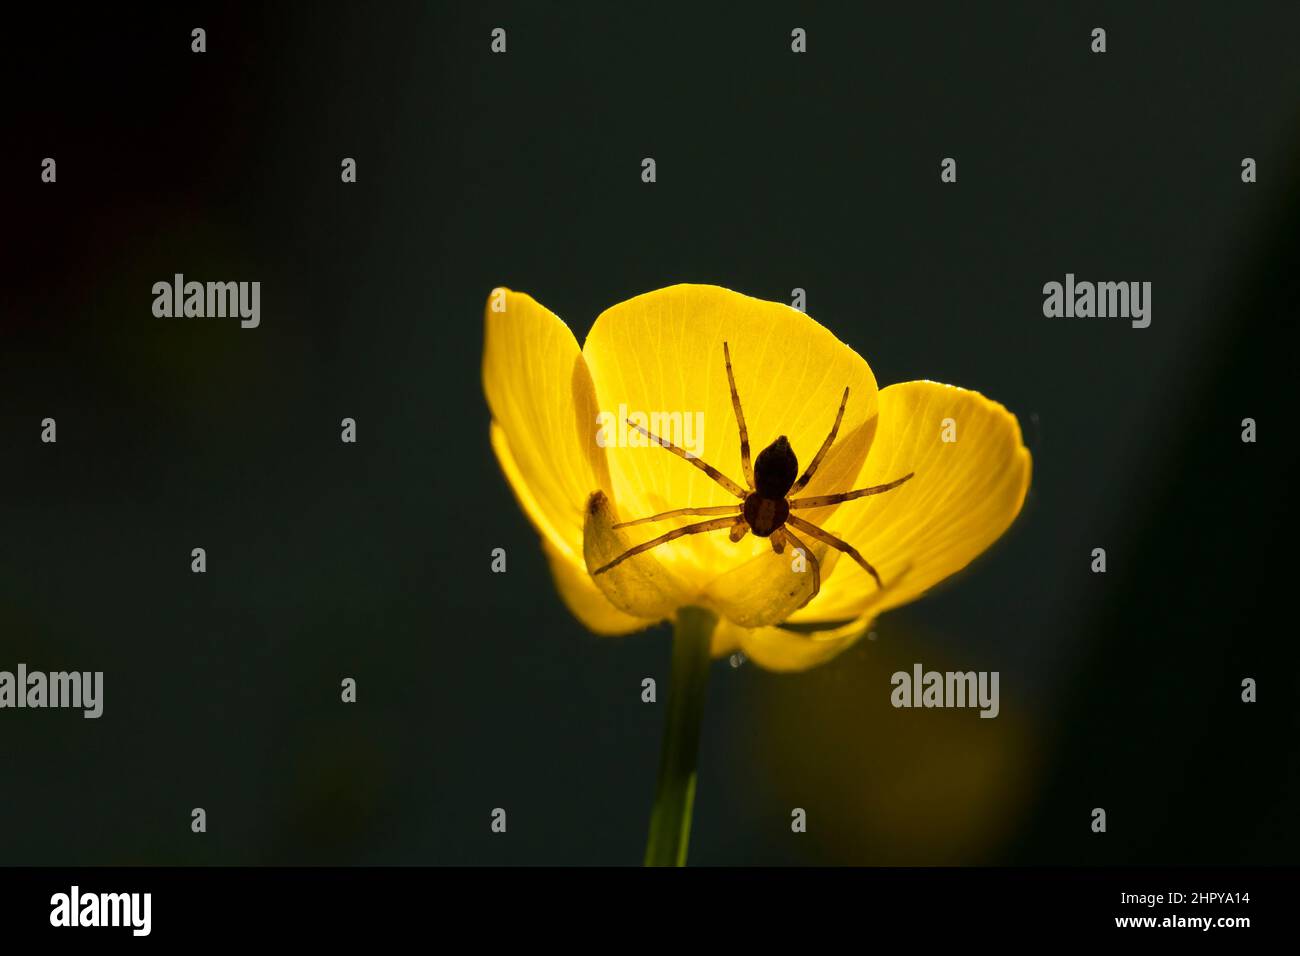 Running Crab Spider (philodromus sp) on yellow flower, Alsace, France Stock Photo